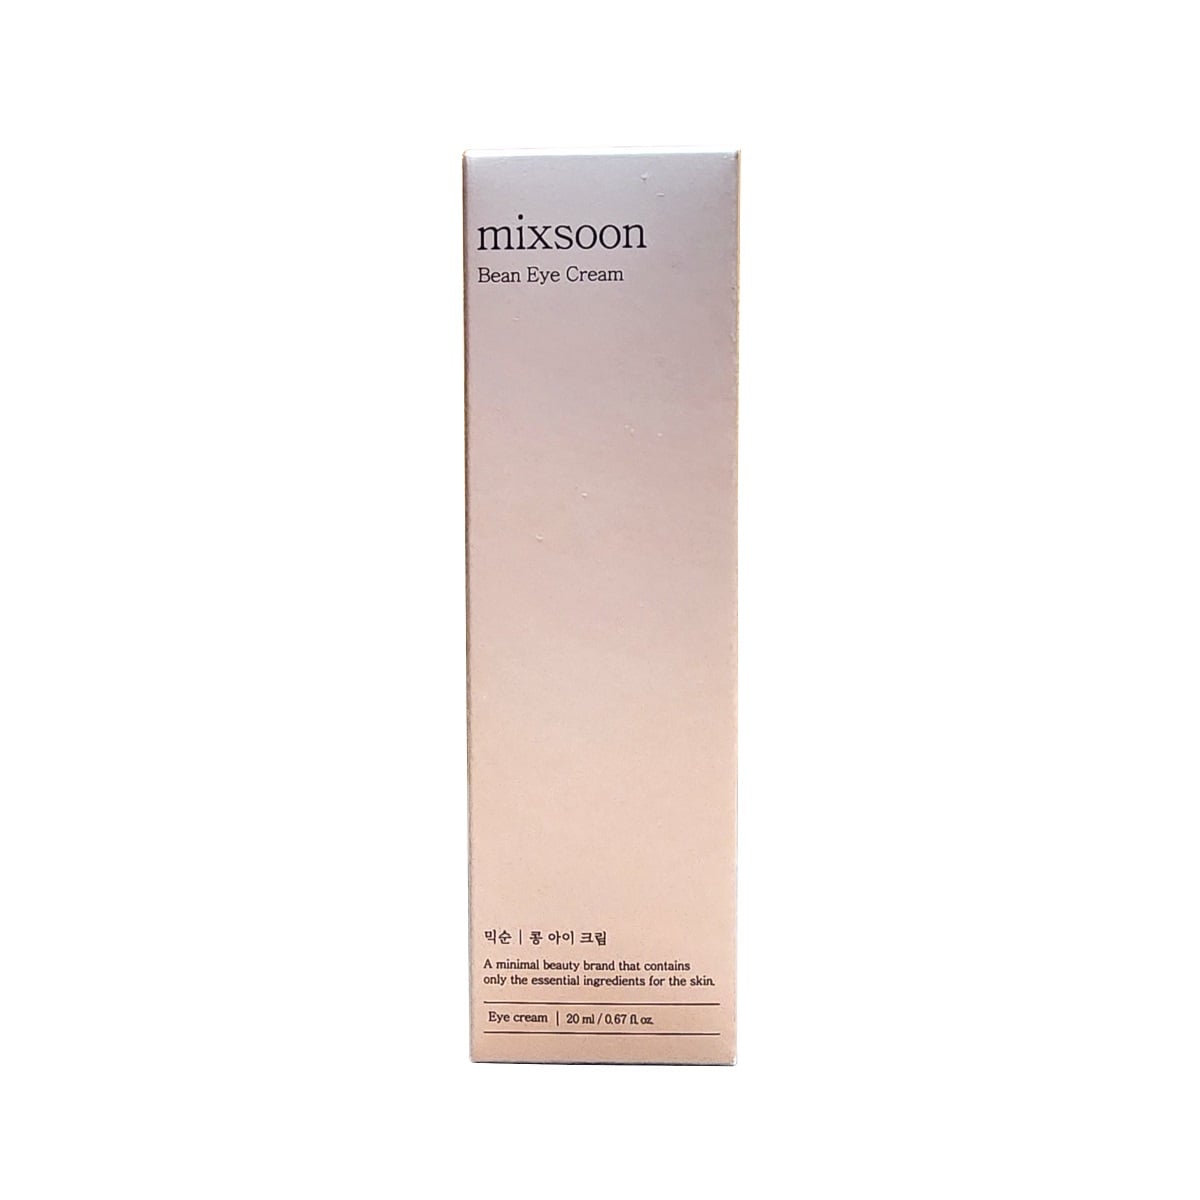 Product label for mixsoon Bean Eye Cream (20 mL)